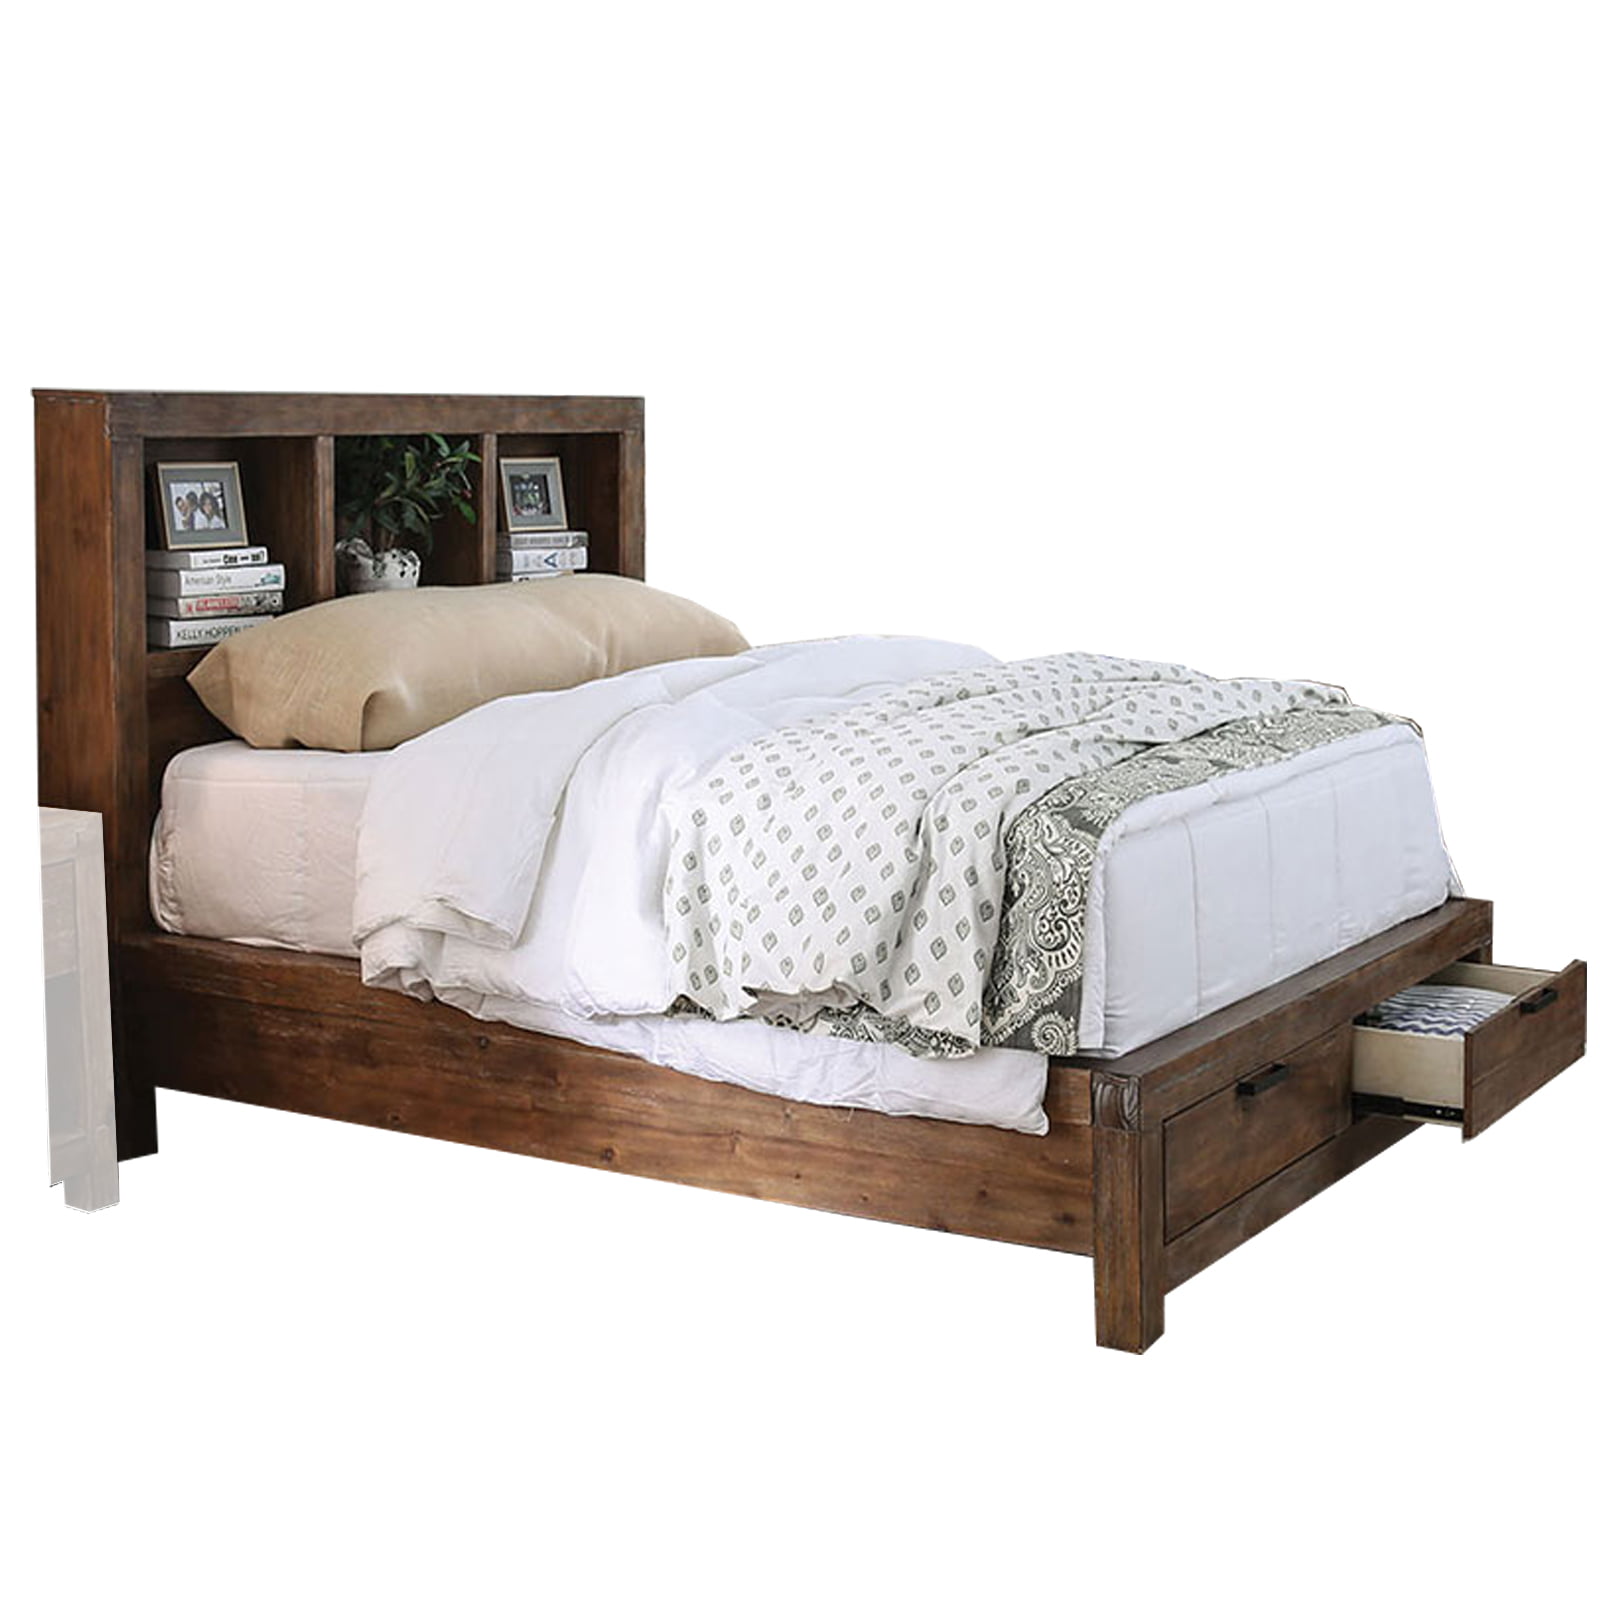 Rustic Wooden Queen Size Bed with Storage Compartments, Brown - Walmart.com